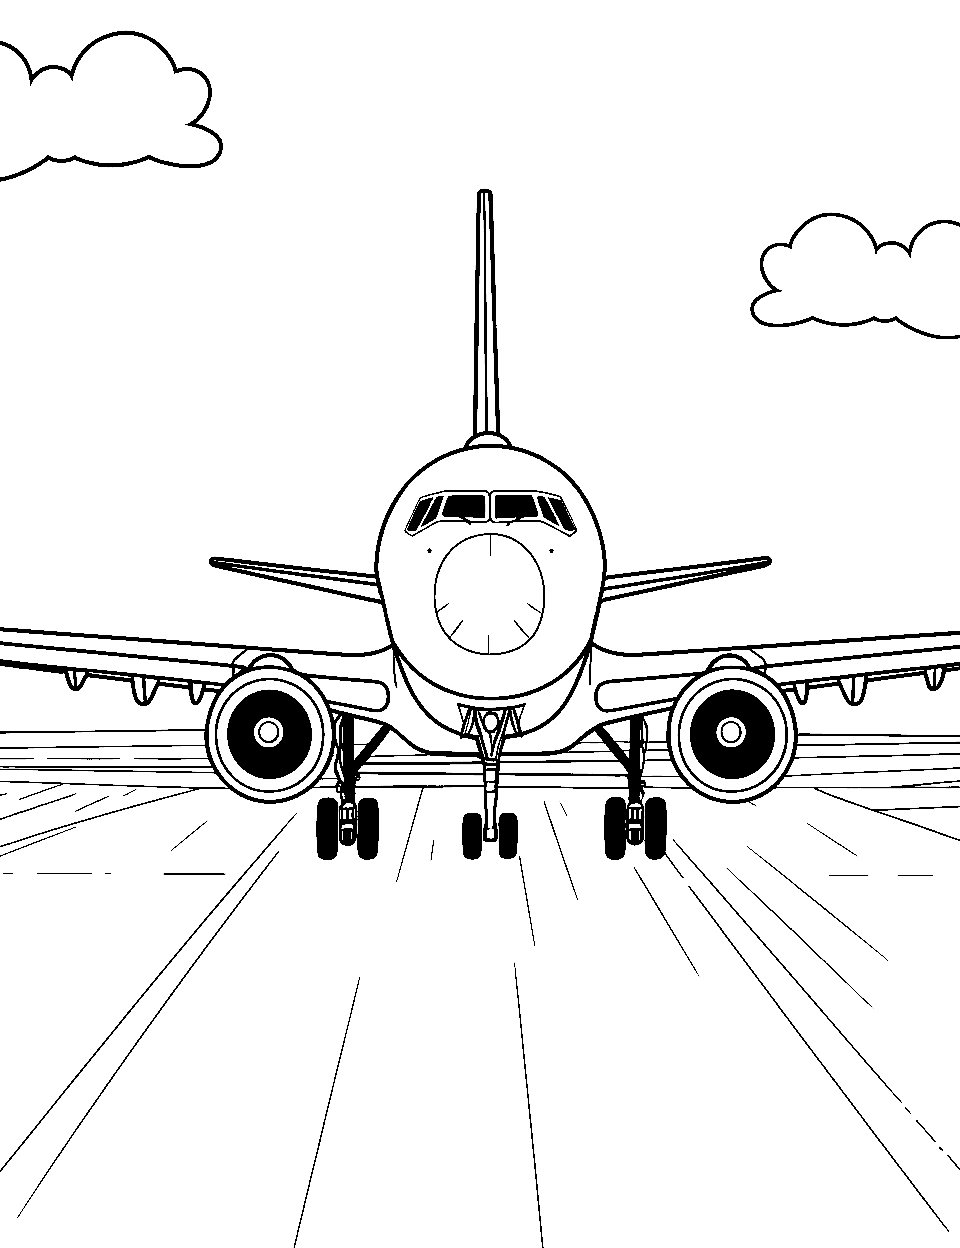 Boeing 737 Landing Airplane Coloring Page - A Boeing 737 on an airport runway.